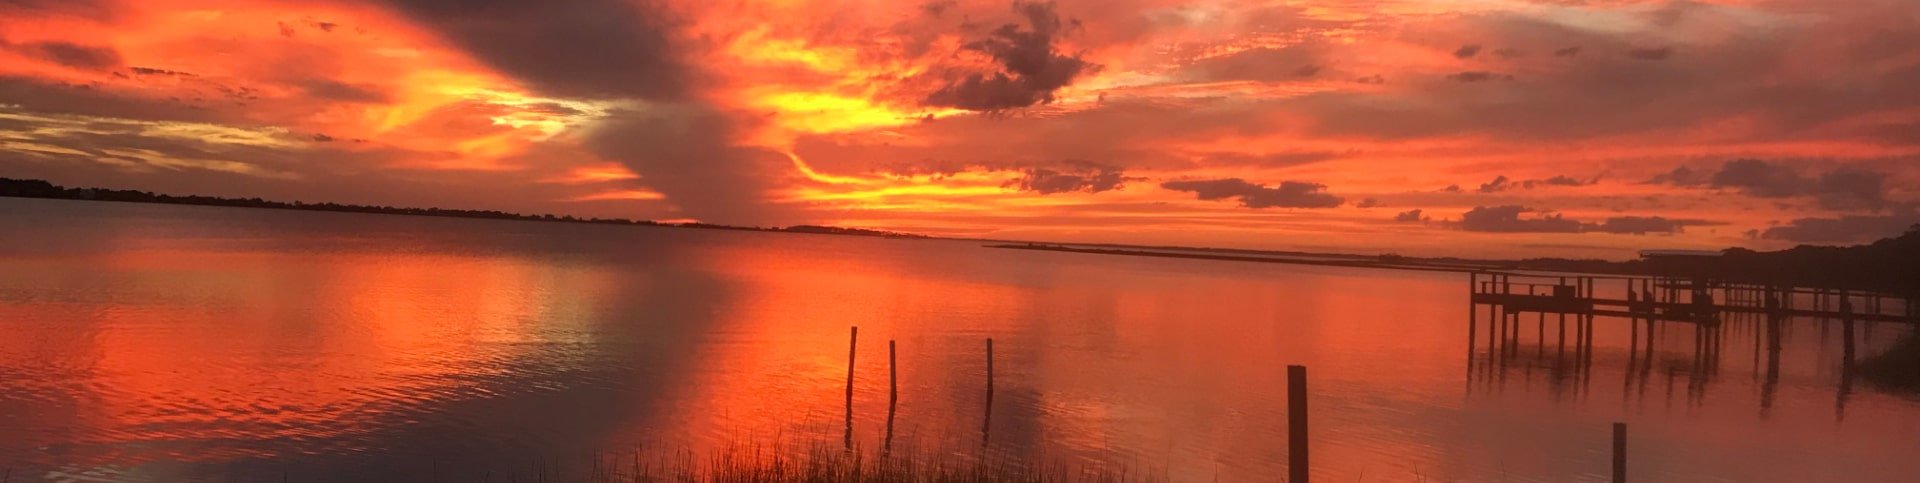 Sunset over water in Alligator Point